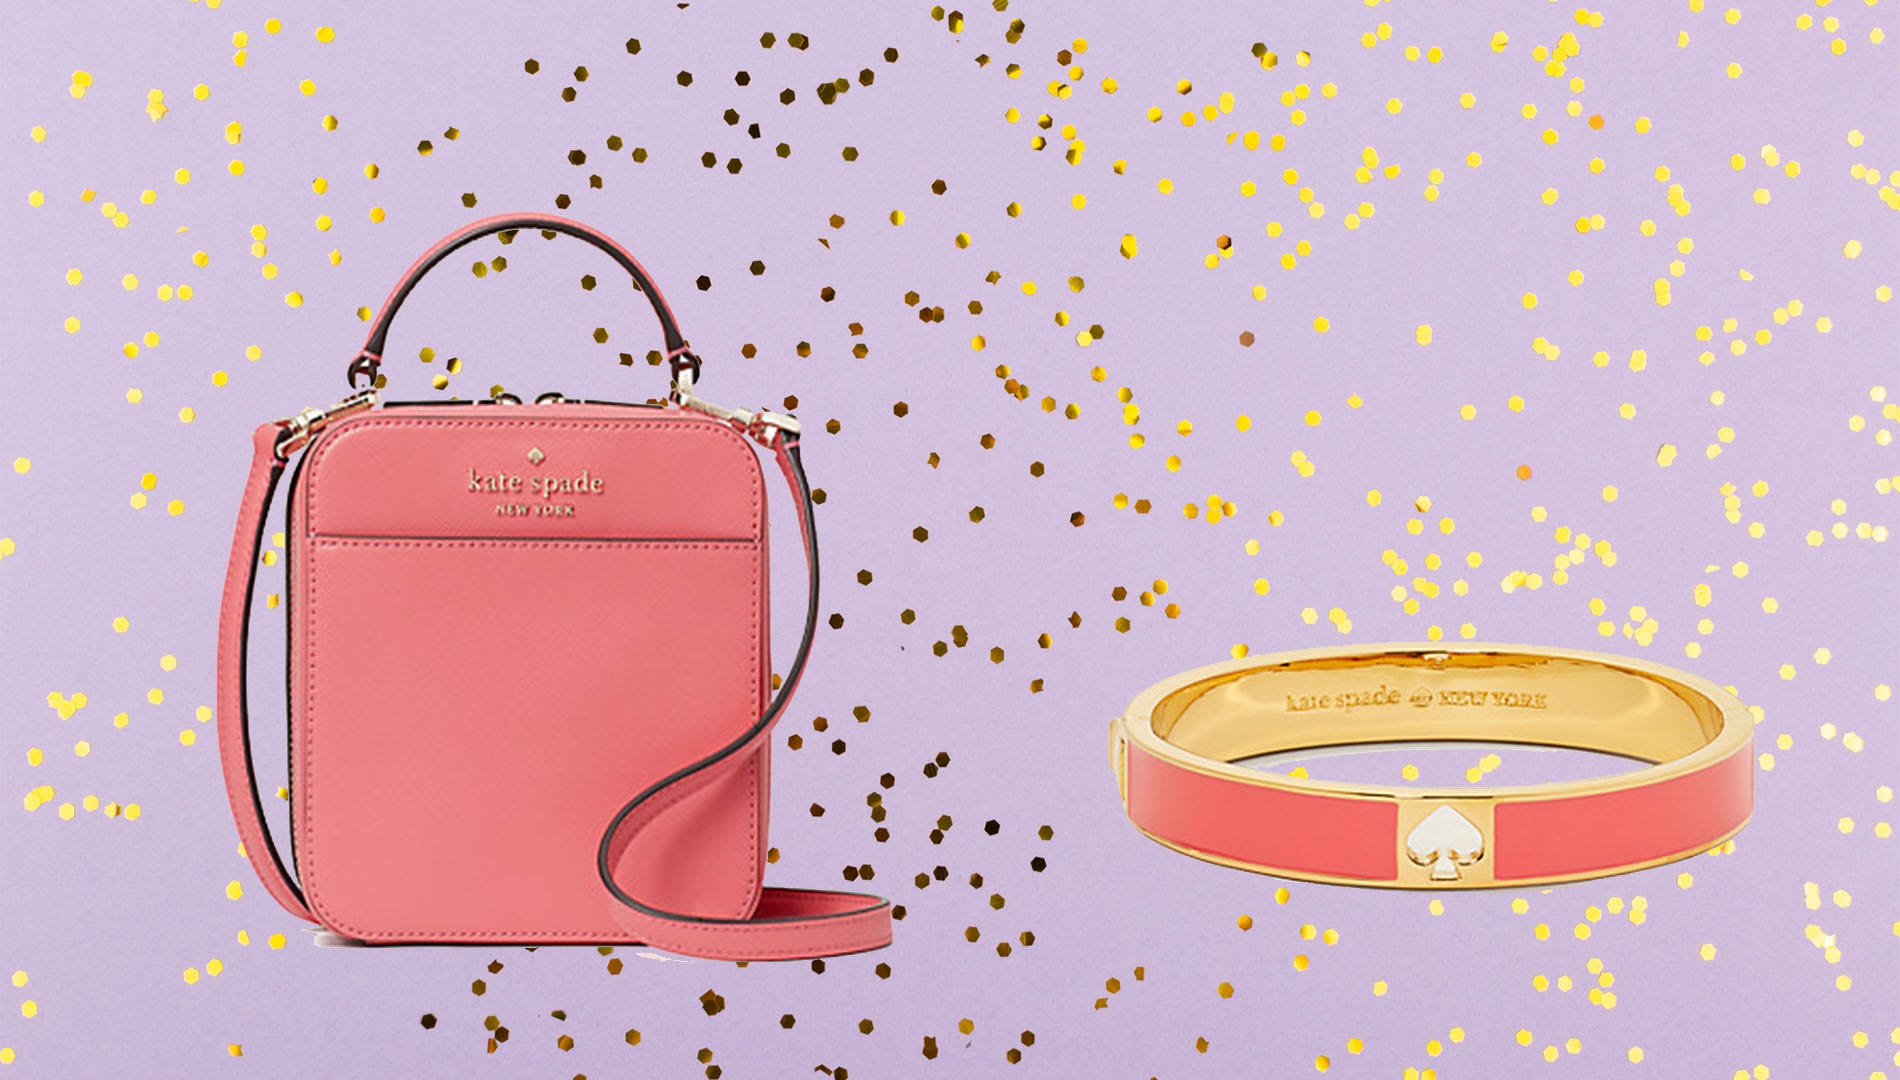 Kate Surprise: The best purses, and more up to 78% off